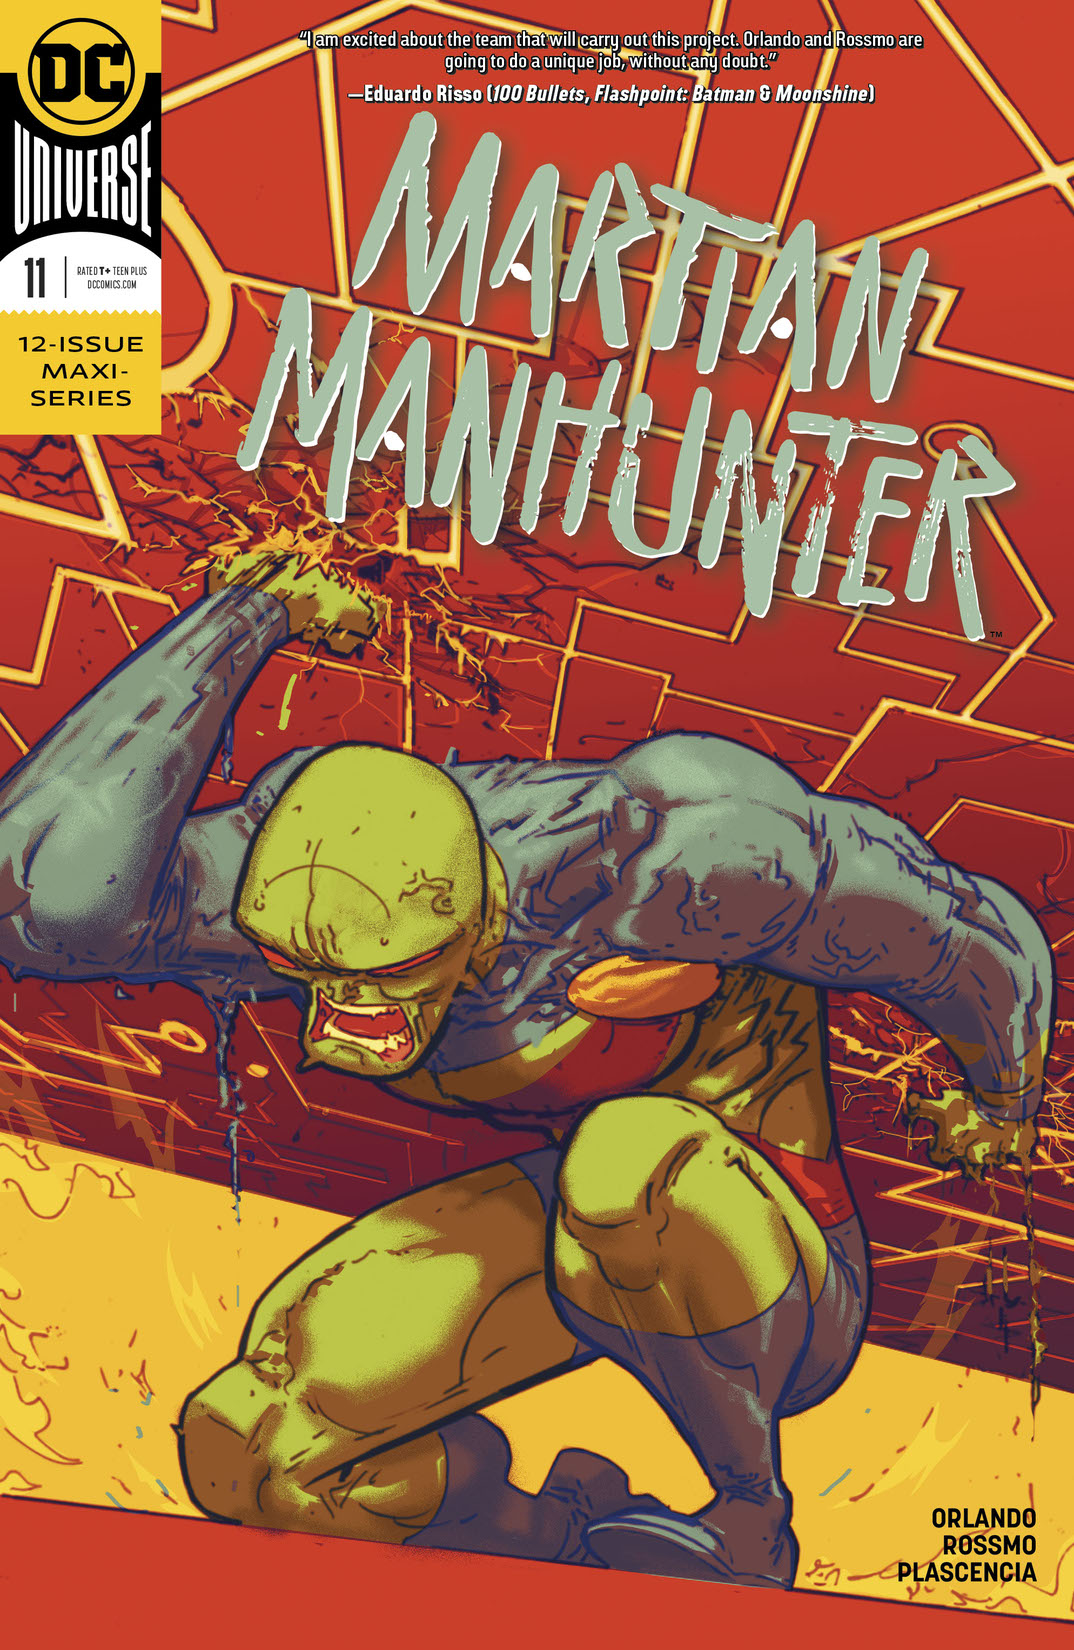 Martian Manhunter (2018-2020) #11 preview images